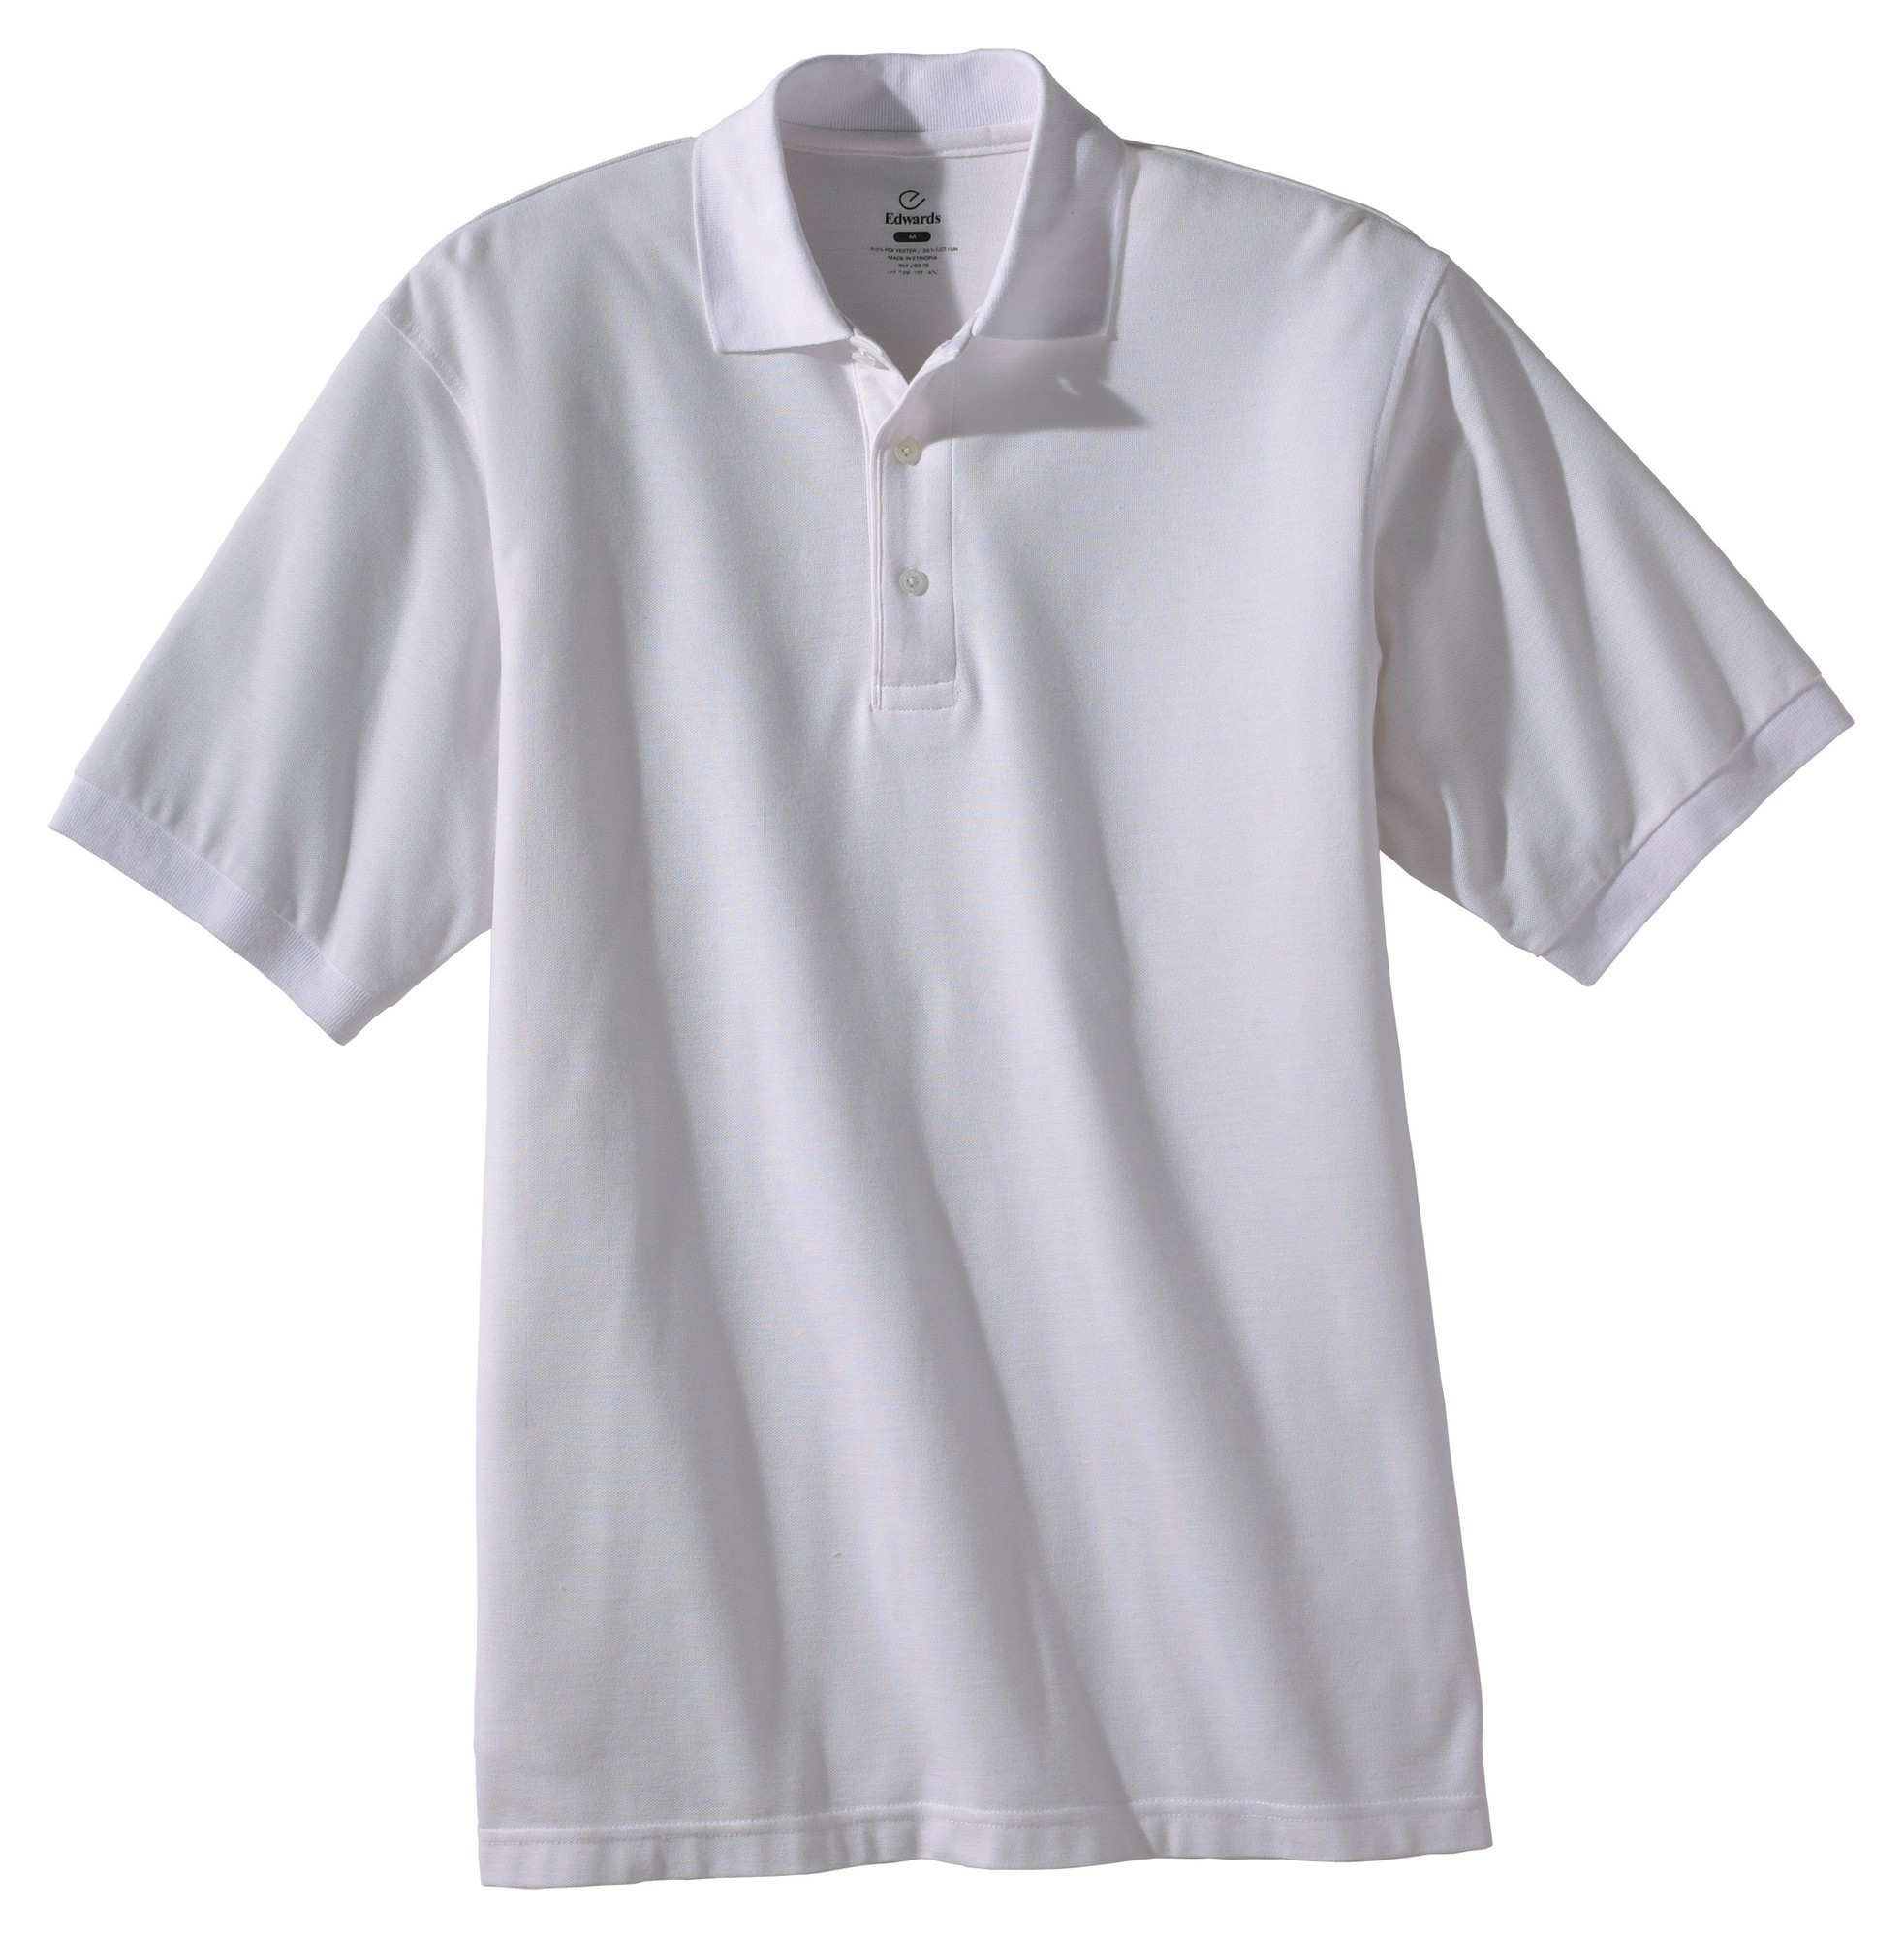 Men's Short Sleeve Soft Touch Blended Pique Polo